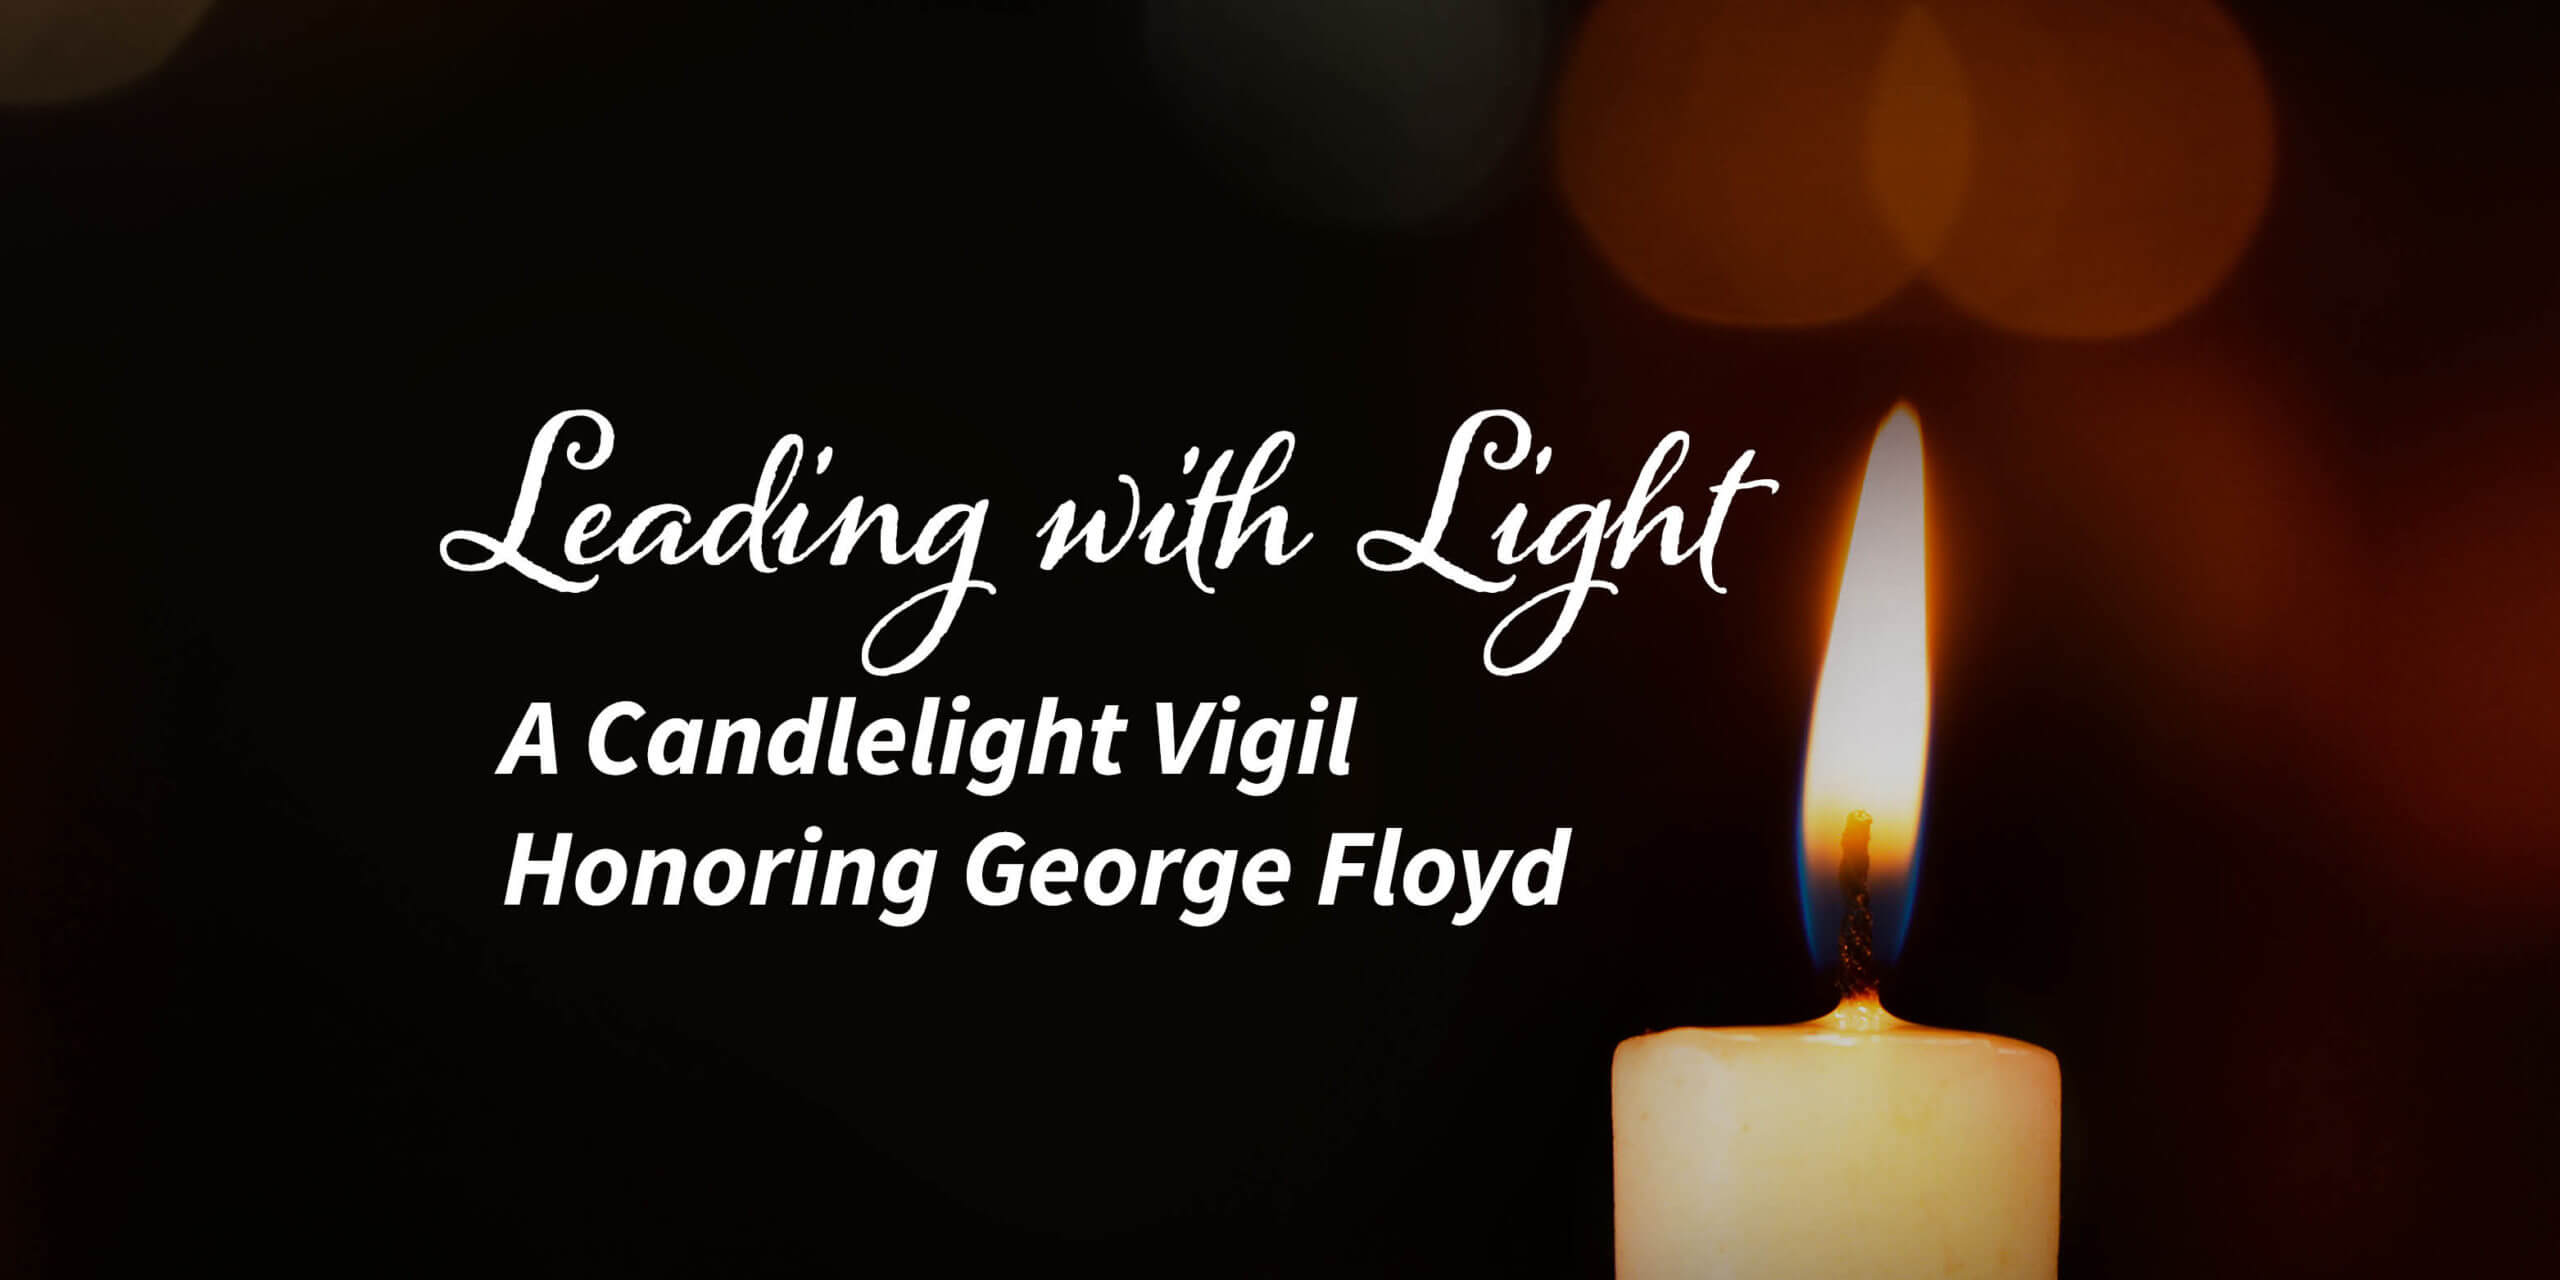 single lit candle on a dark background with bokeh effect. Text overlay reads "leading with light: a candlight vigil honoring George Floyd"